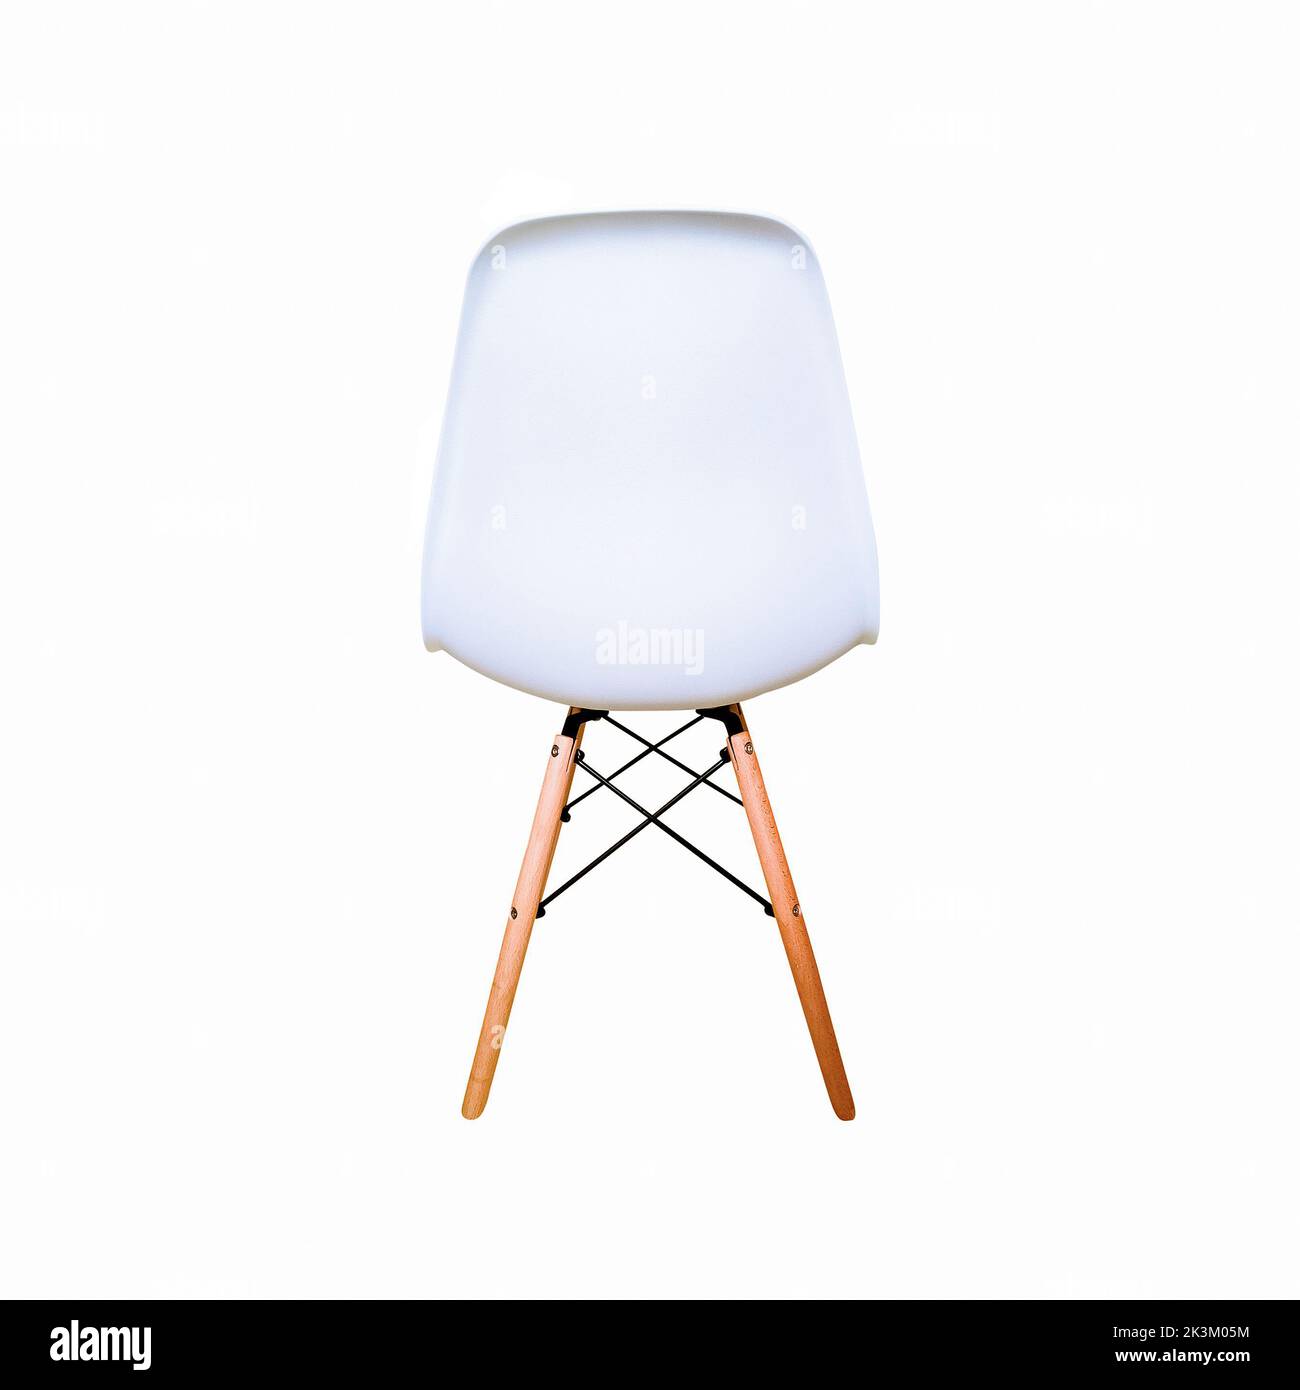 White modern chair with wooden legs isolated on white background. Back view Stock Photo